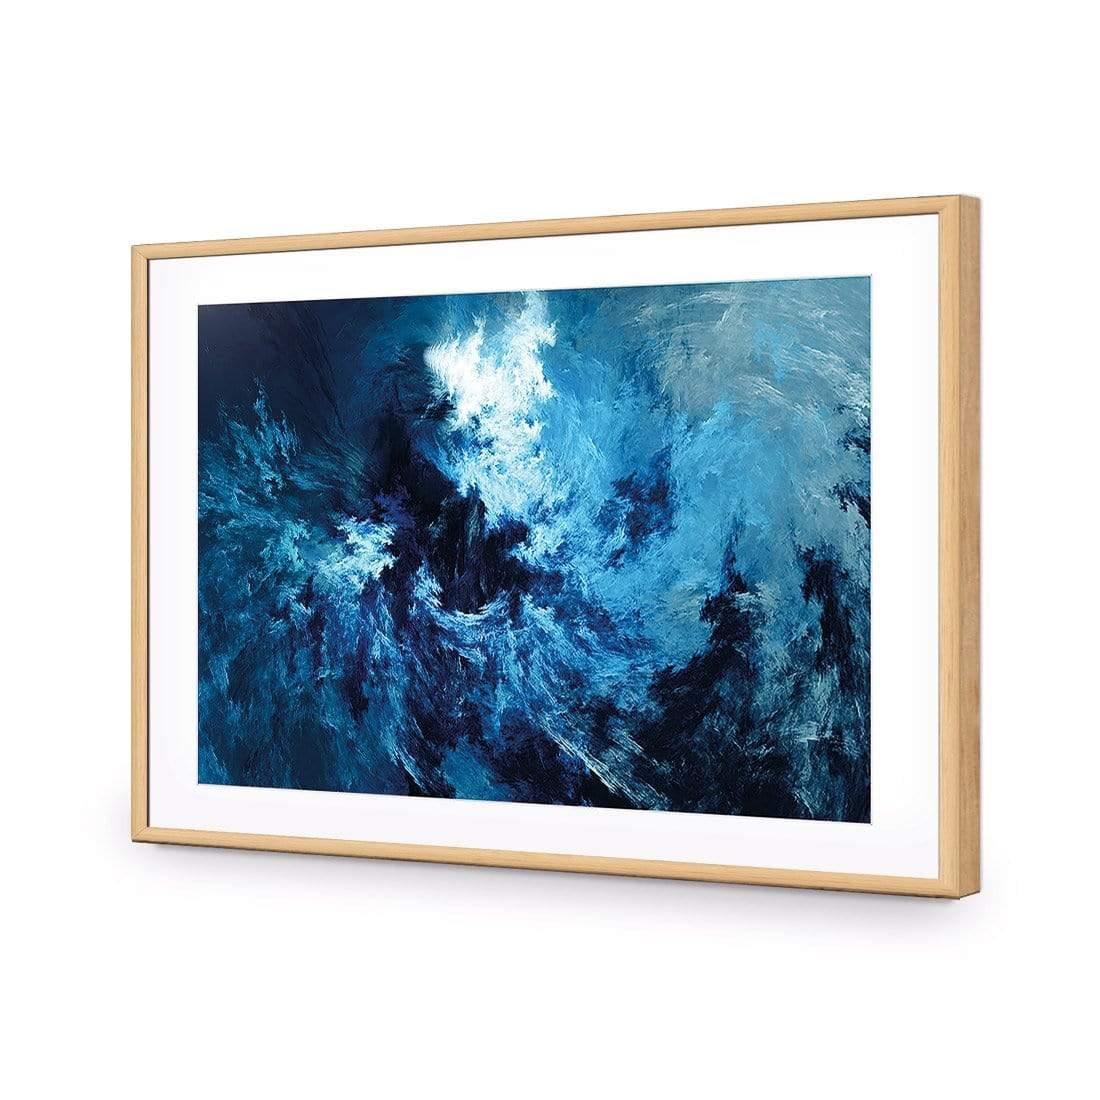 Into the Storm Wall Art